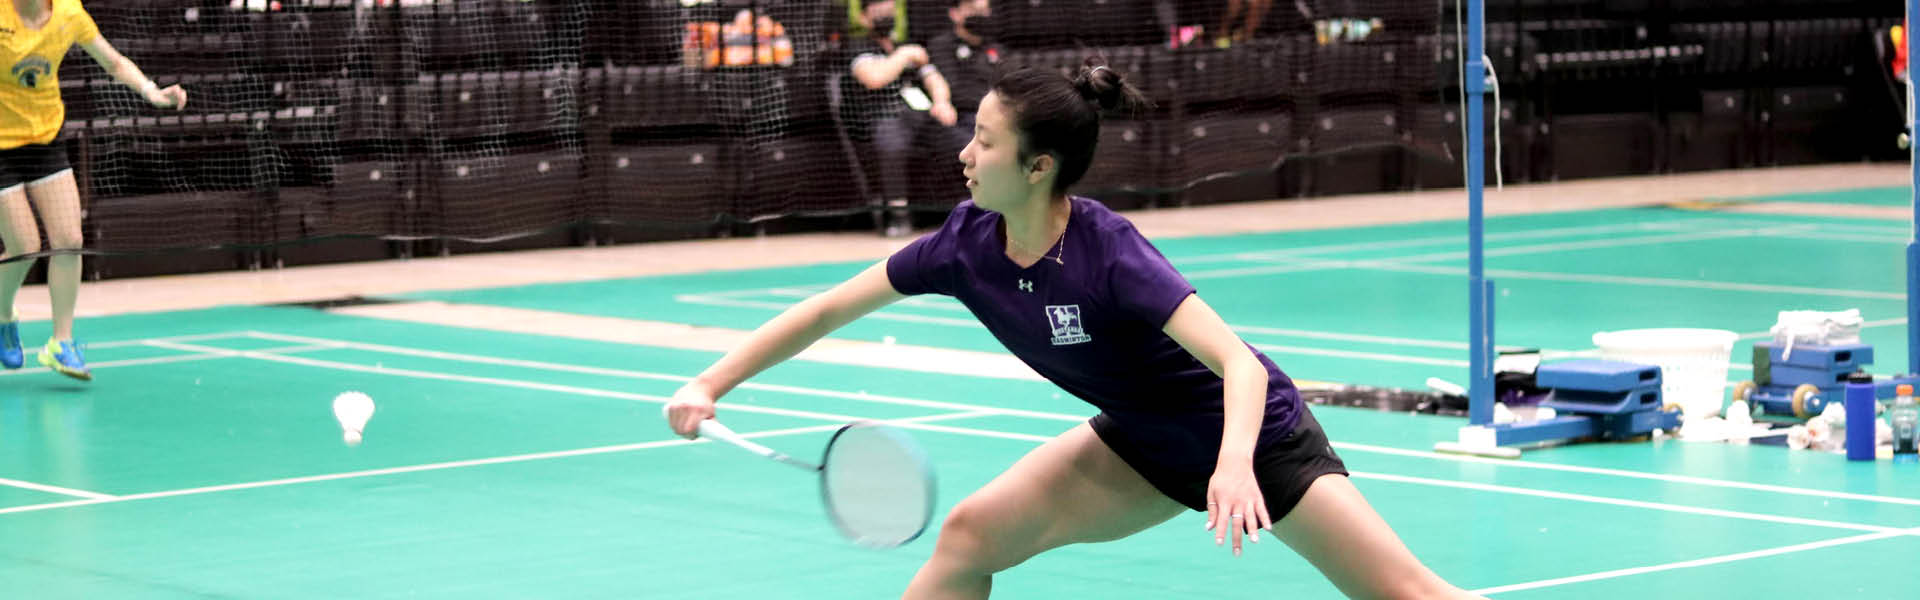 Western Mustangs women’s badminton player lunging for the birdie